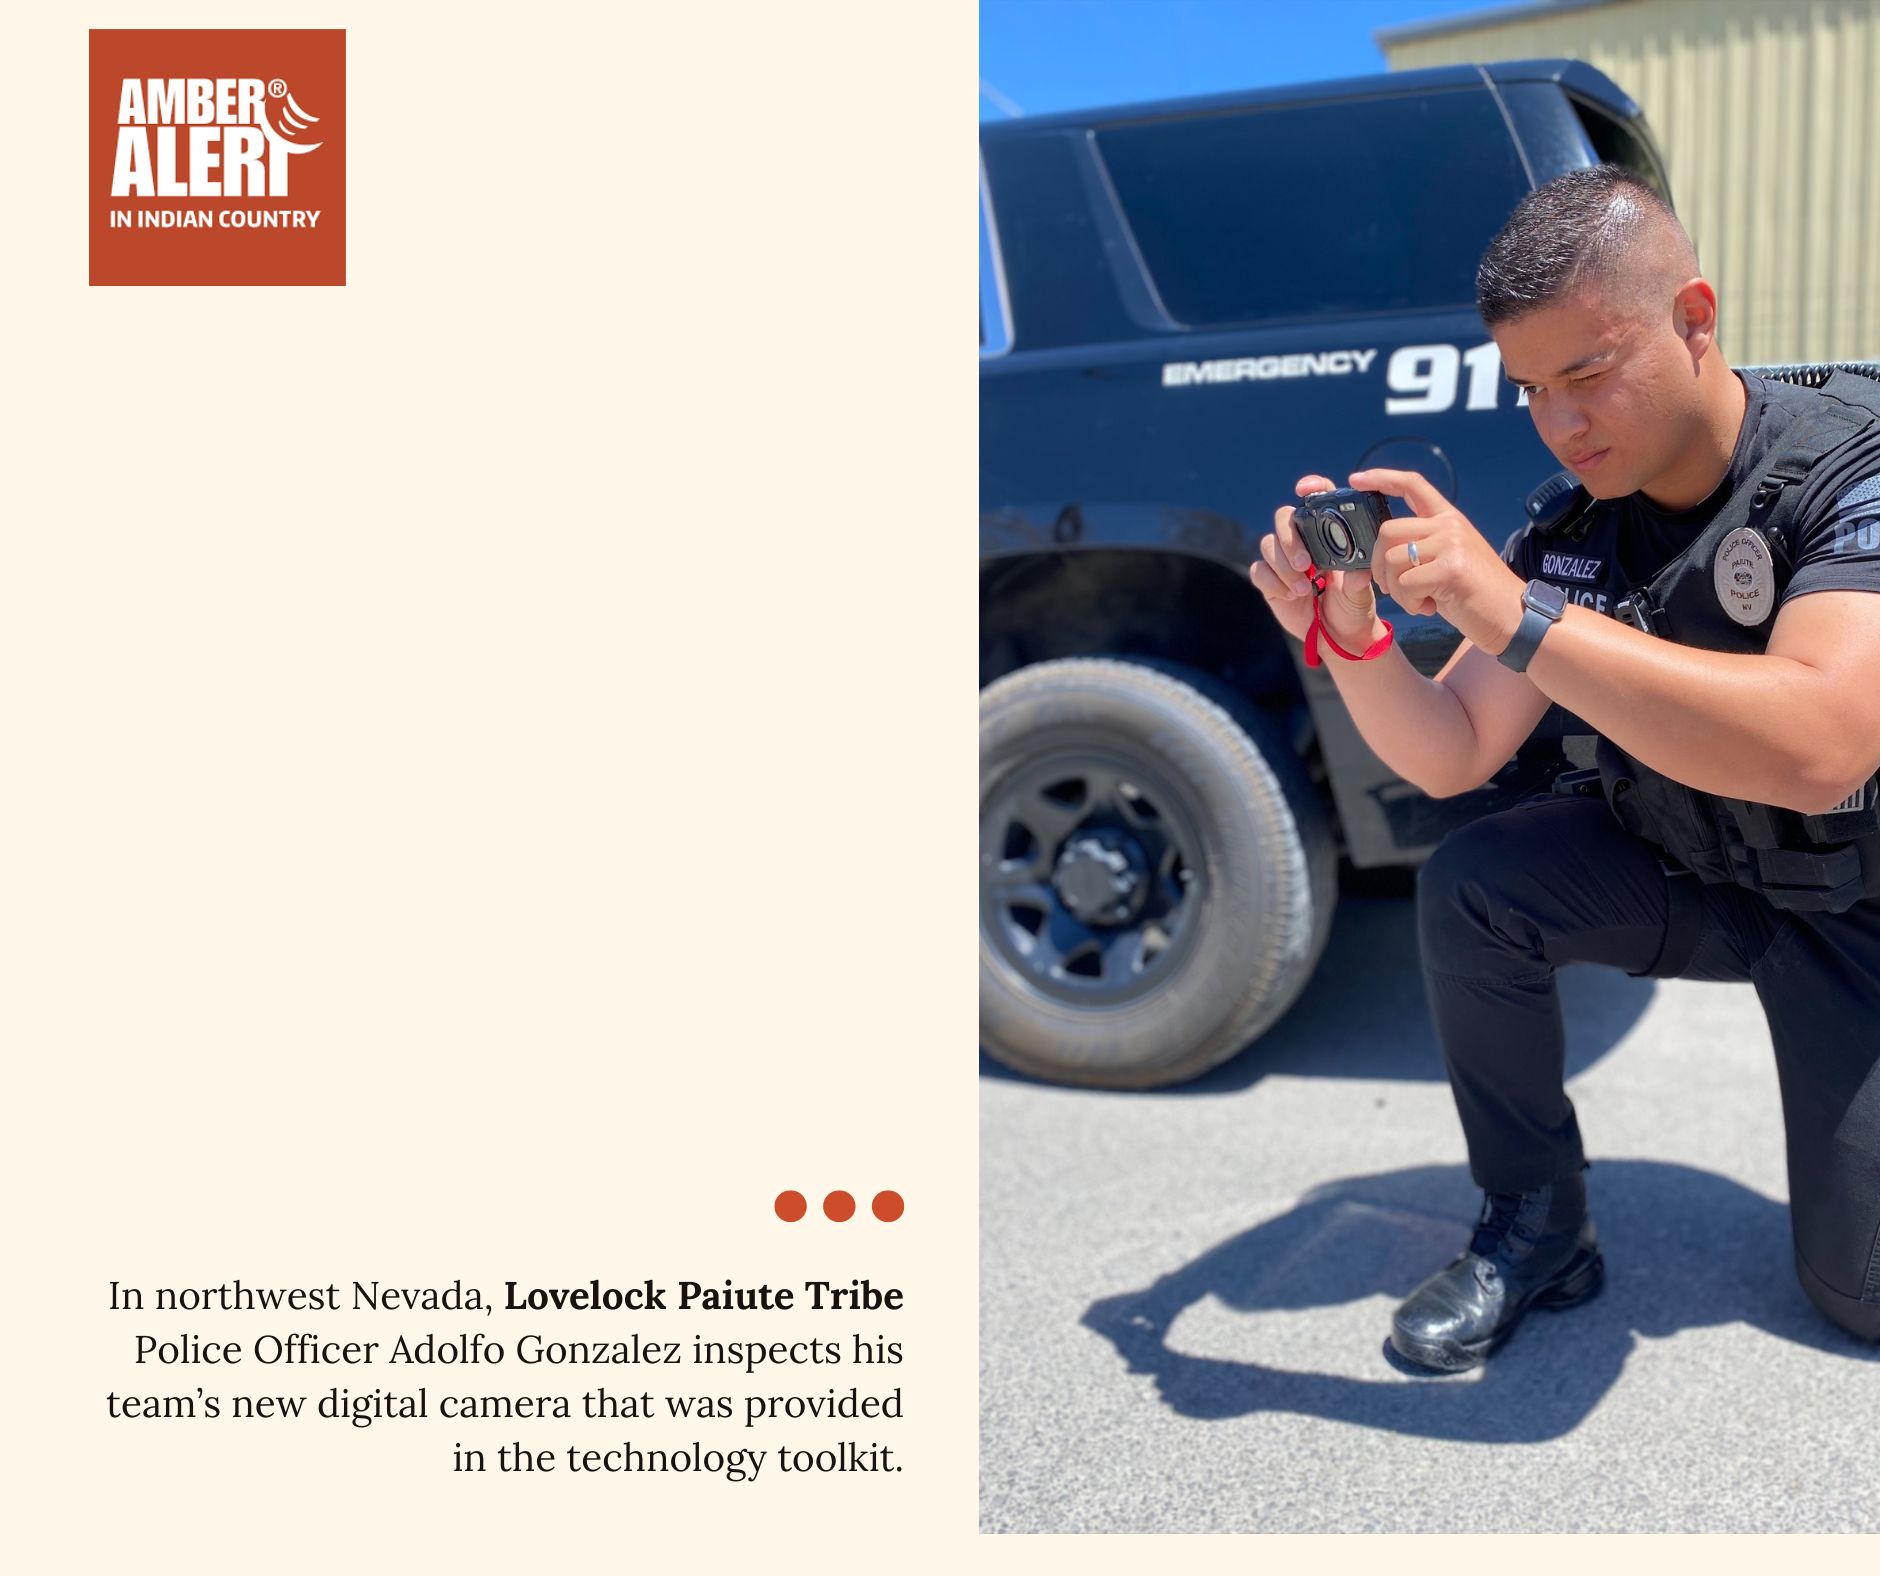 Lovelock Paiute Tribe Police Officer Adolfo Gonzalez inspects his team's new digital camera provided in the technology toolkit